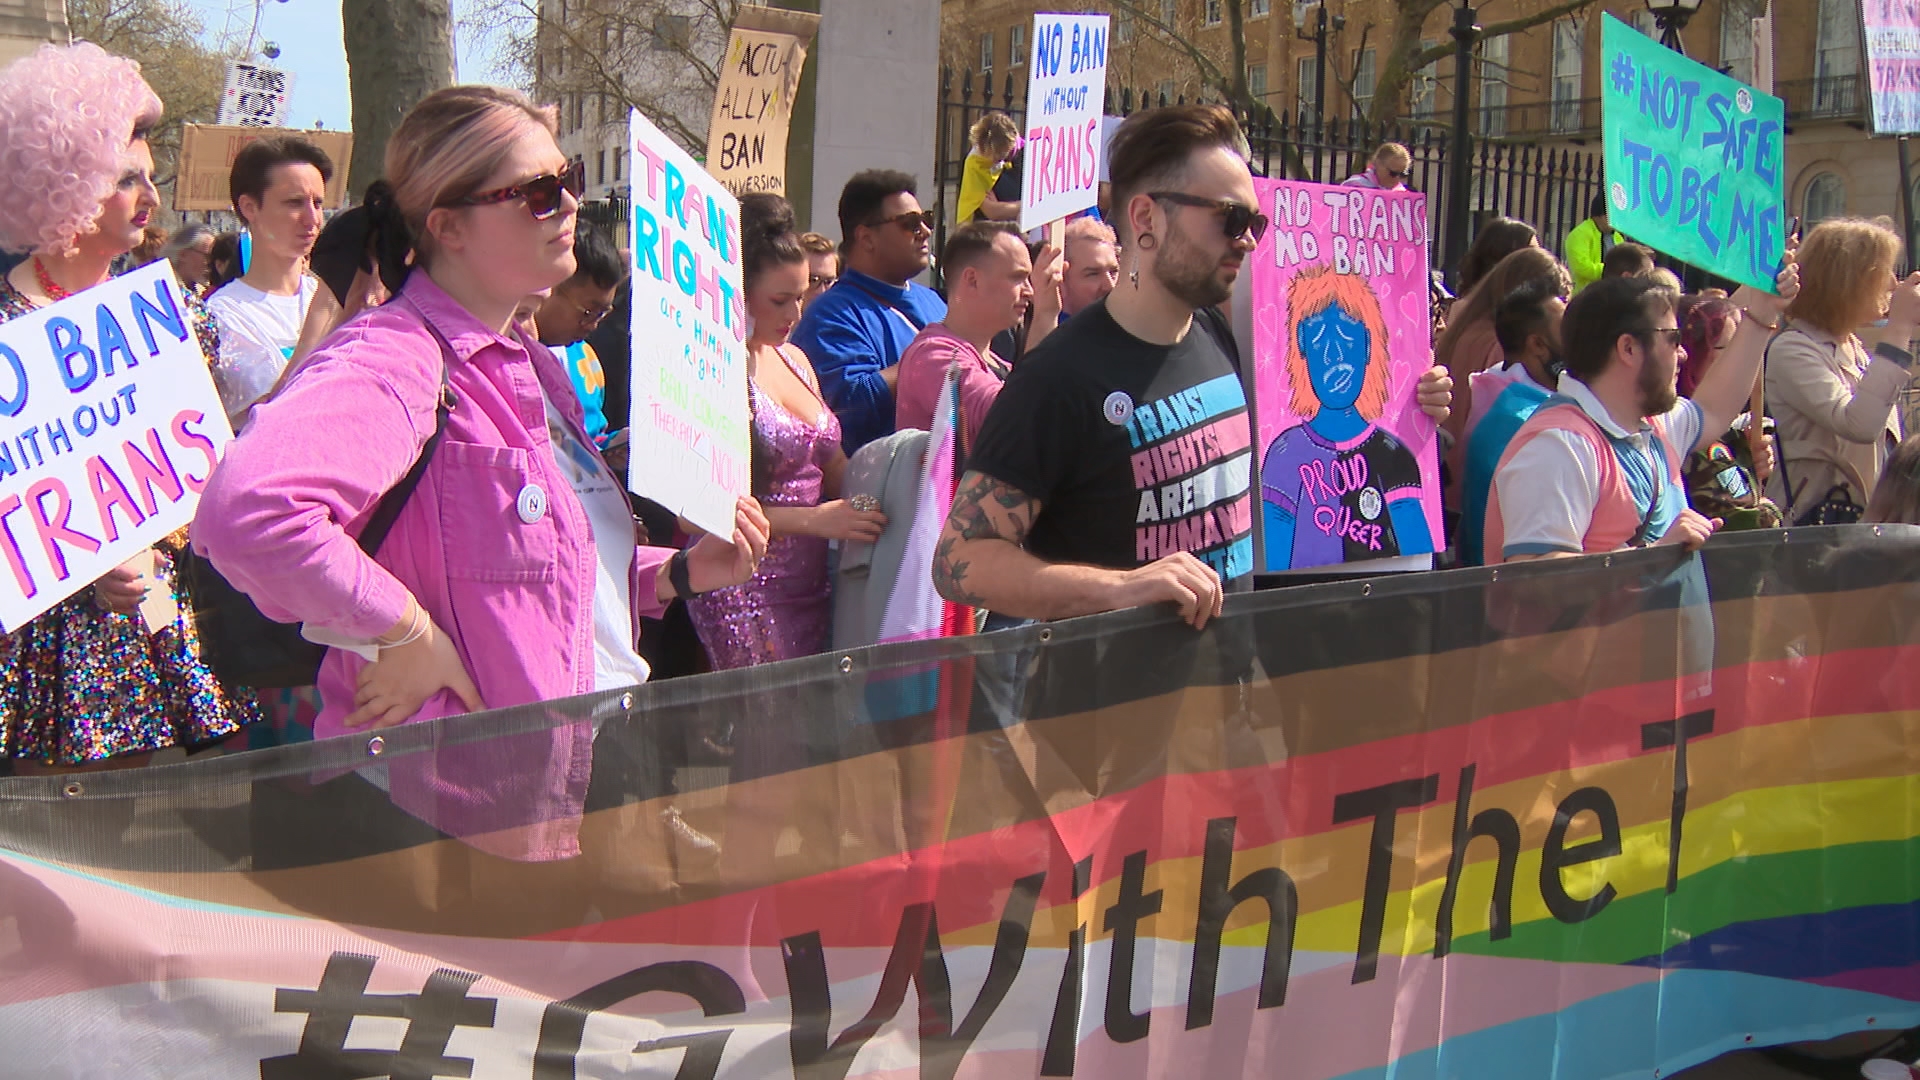 Thousands Attend Protests Calling For Conversion Therapy Ban To Include Transgender People